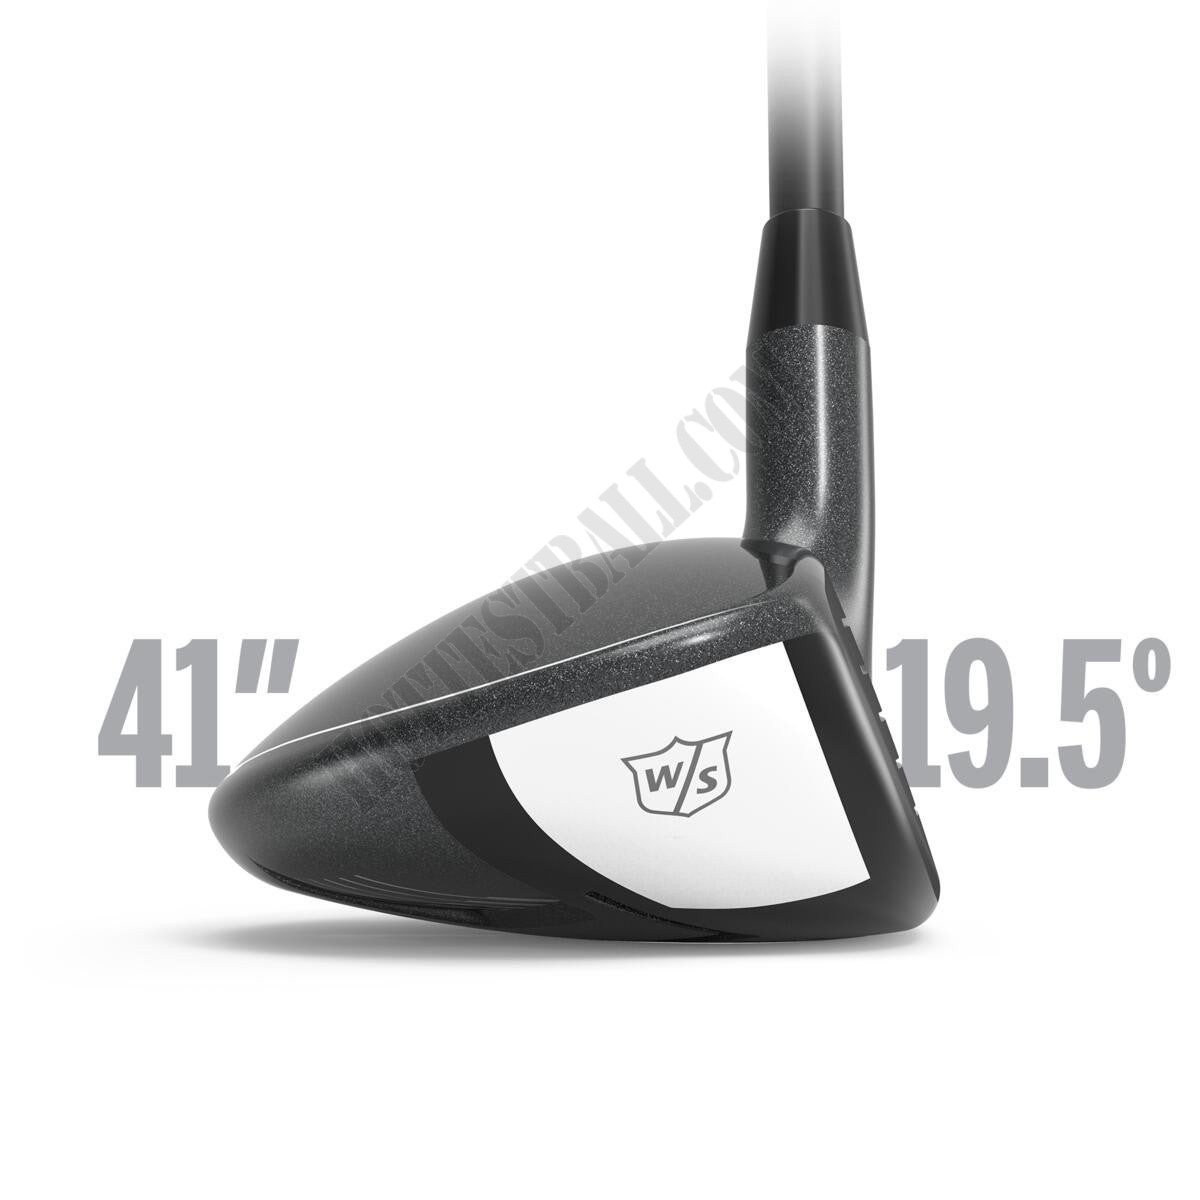 Launch Pad FY Club Hybrids - Wilson Discount Store - -6